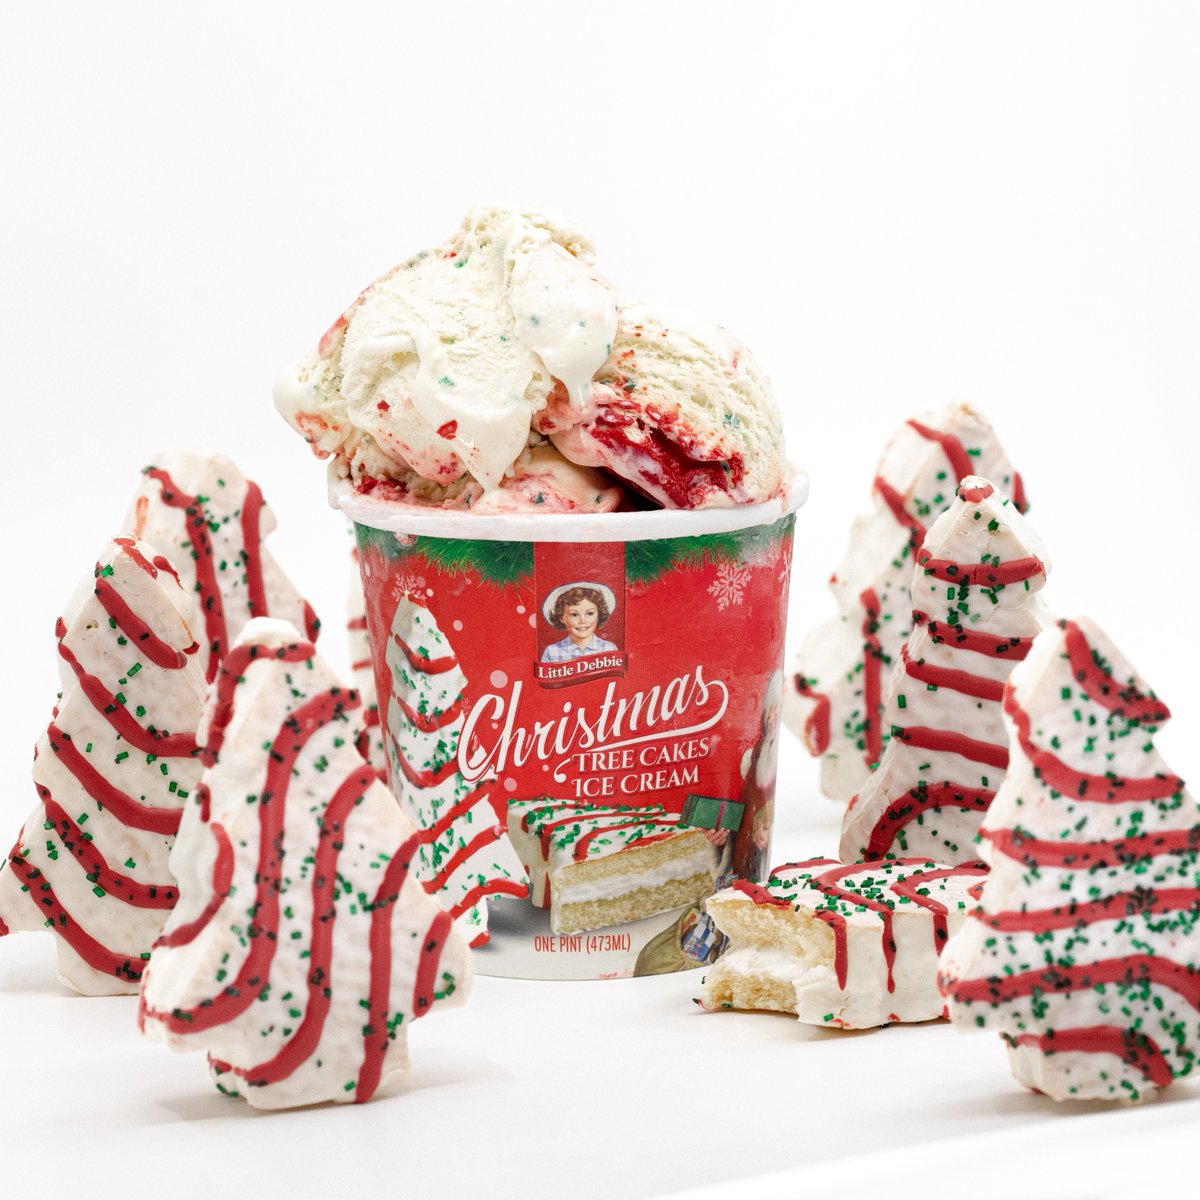 The season’s perfect pair is back! Stock up on Christmas Tree Cakes® and Hudsonville's Christmas Tree Cake Ice Cream before it’s gone! Find our snacks in a retailer near you by using our snack finder. Link below. #LittleDebbie #Unwrapasmile #Todaywebake littledebbie.com/www/findlocati…